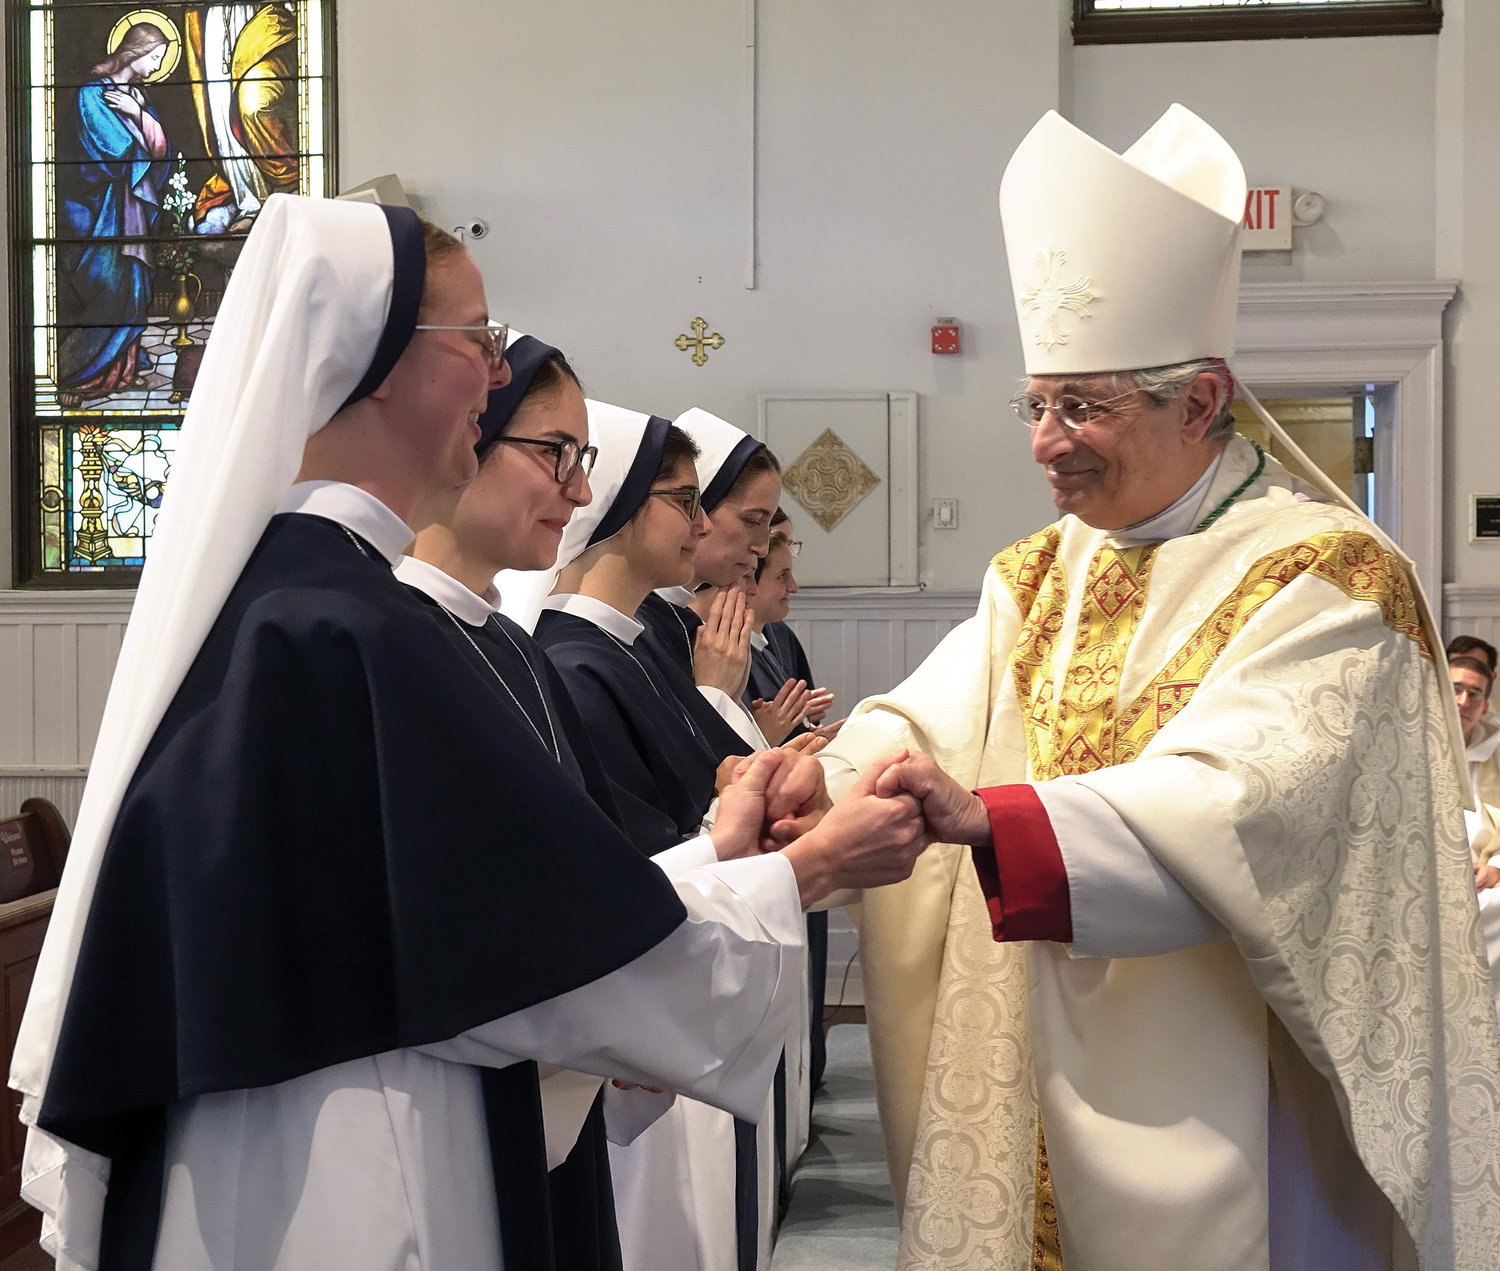 Bishop Salvatore Matano of the Diocese of Rochester hands out medals and greets the sisters.